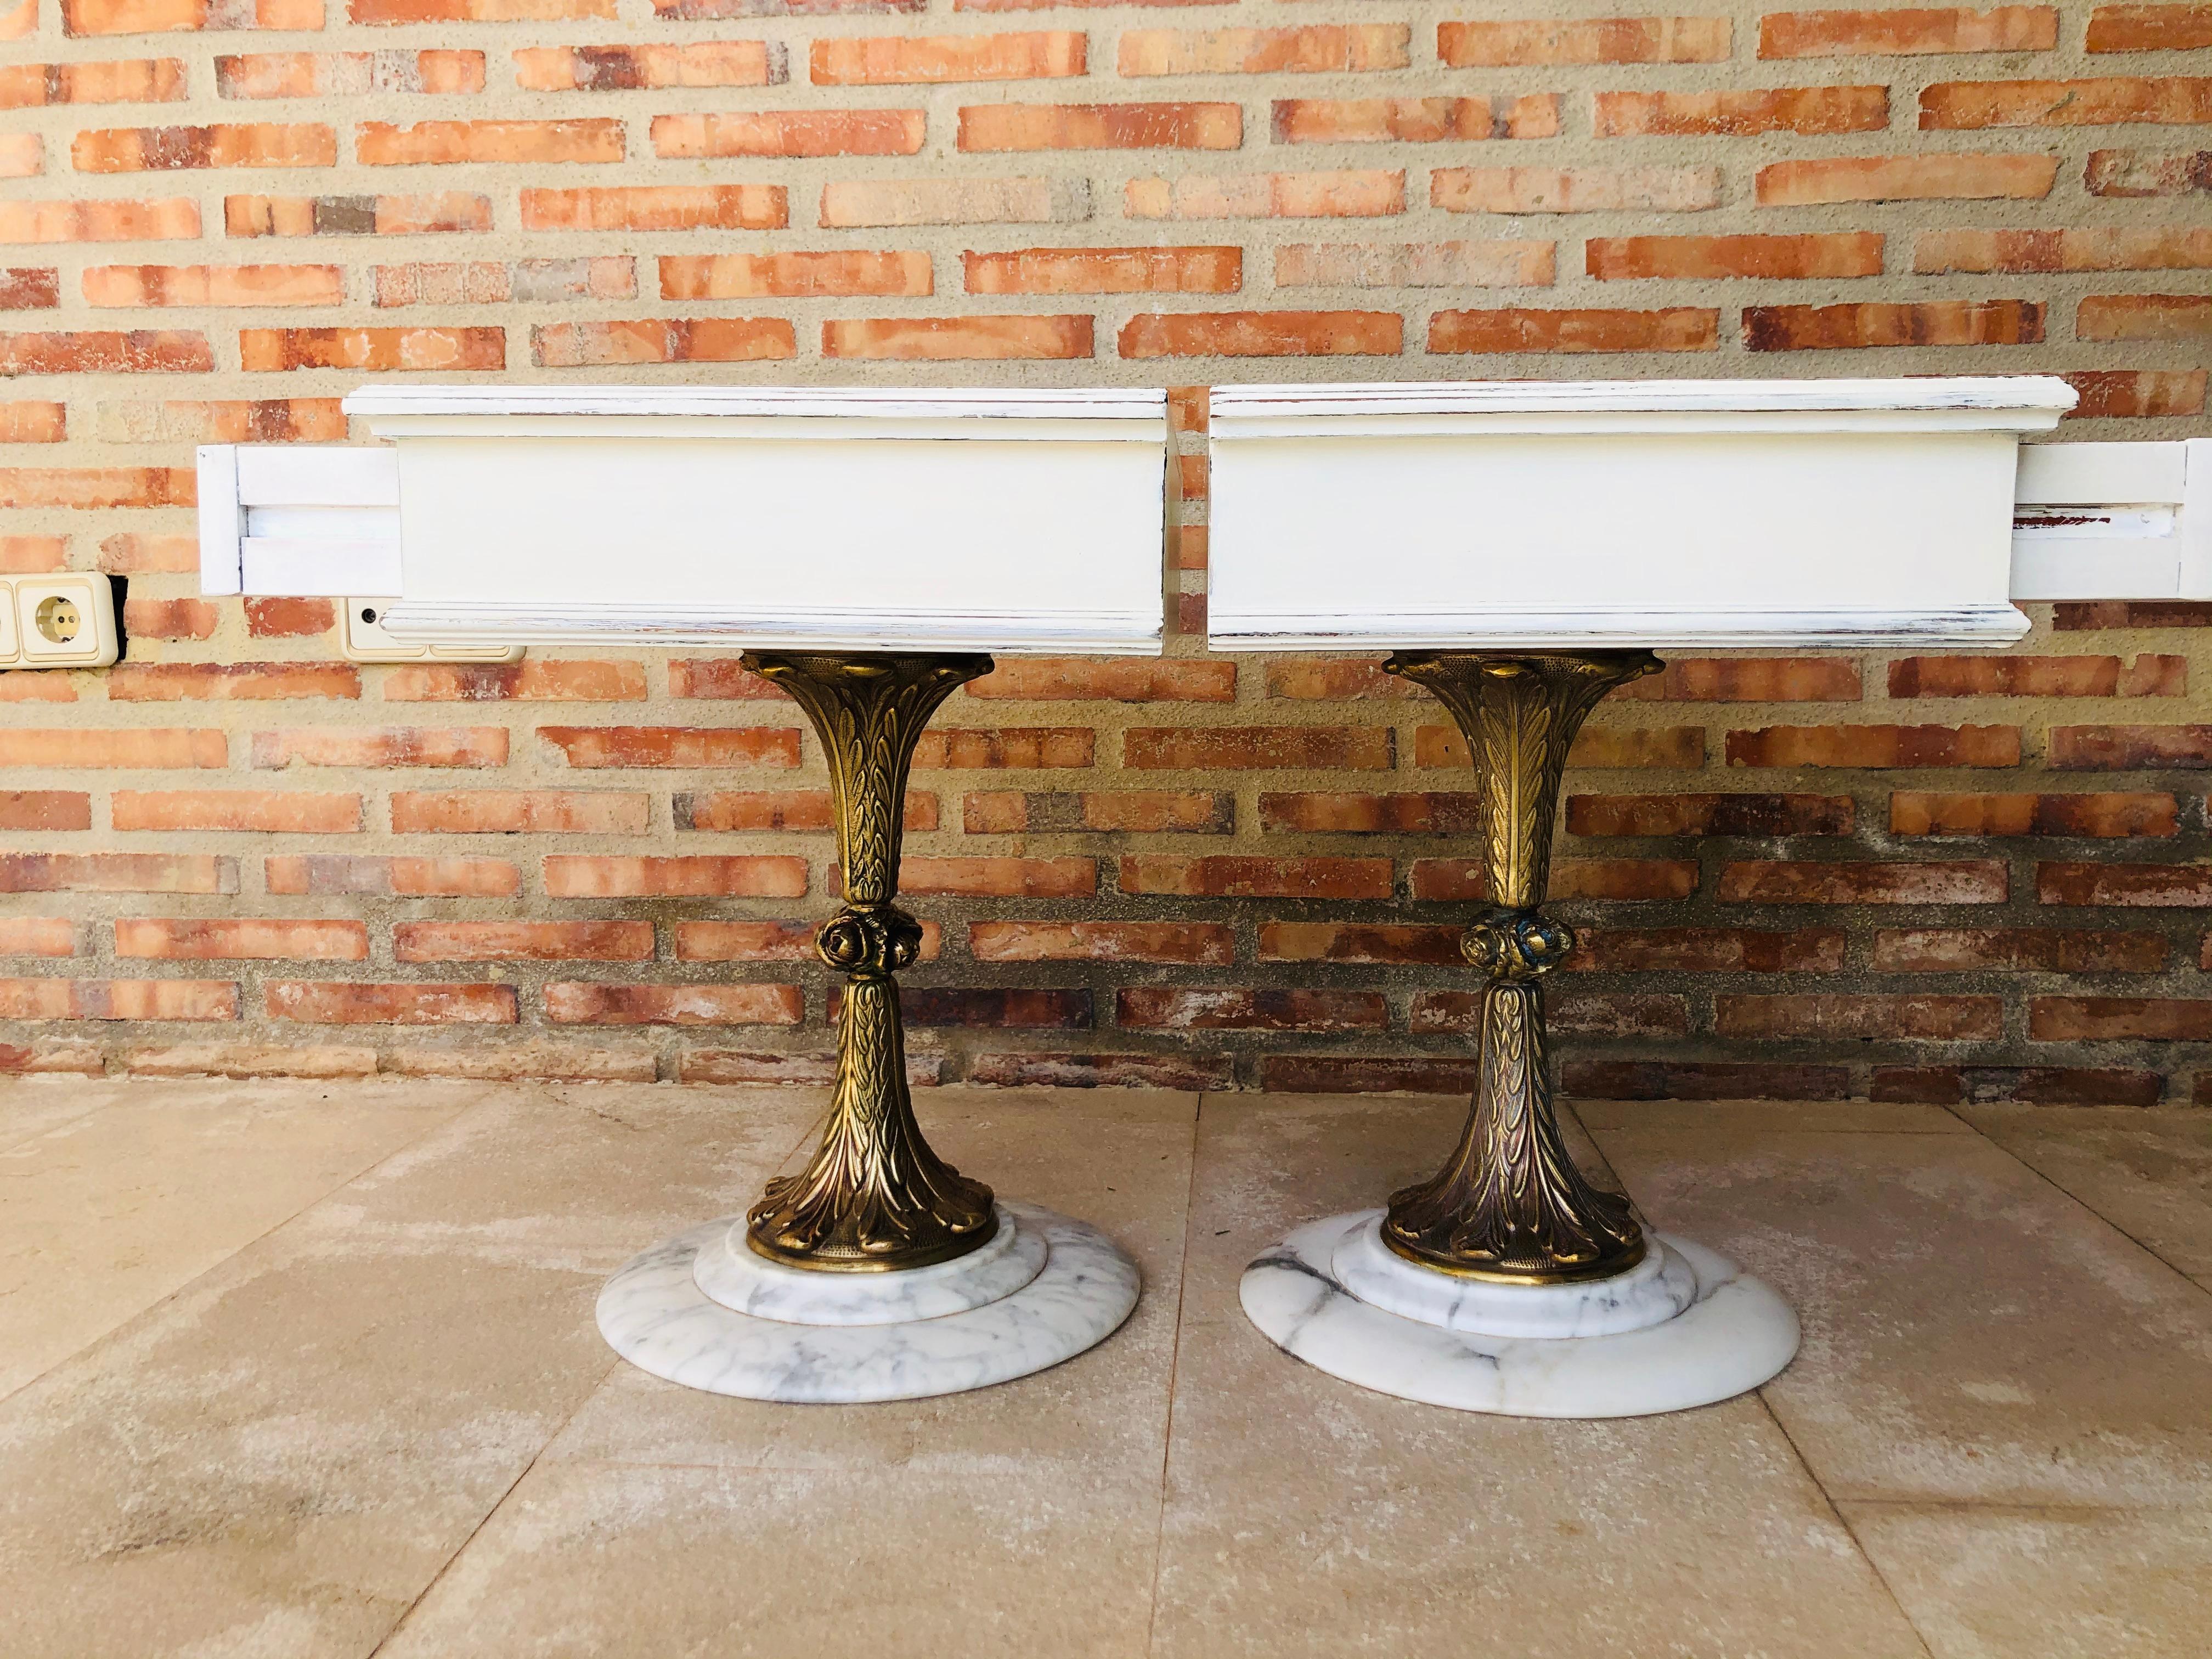 Neoclassical Revival Pair of White Nightstands with One-Drawer and Bronze and Marble Pedestal